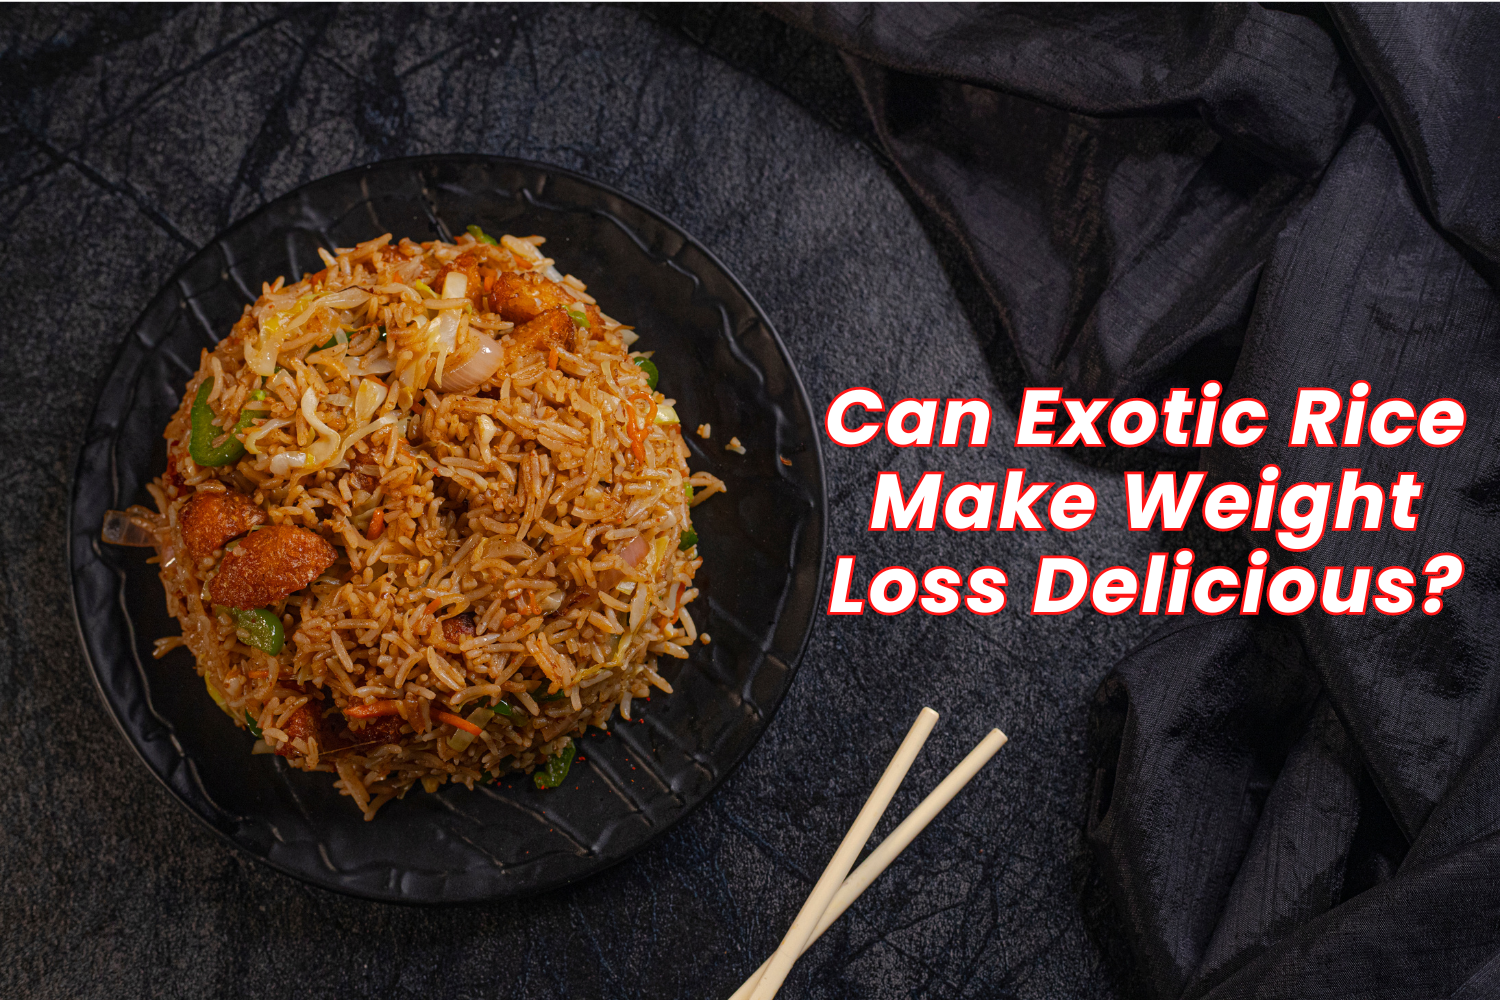 Can Exotic Rice Make Weight Loss Delicious?